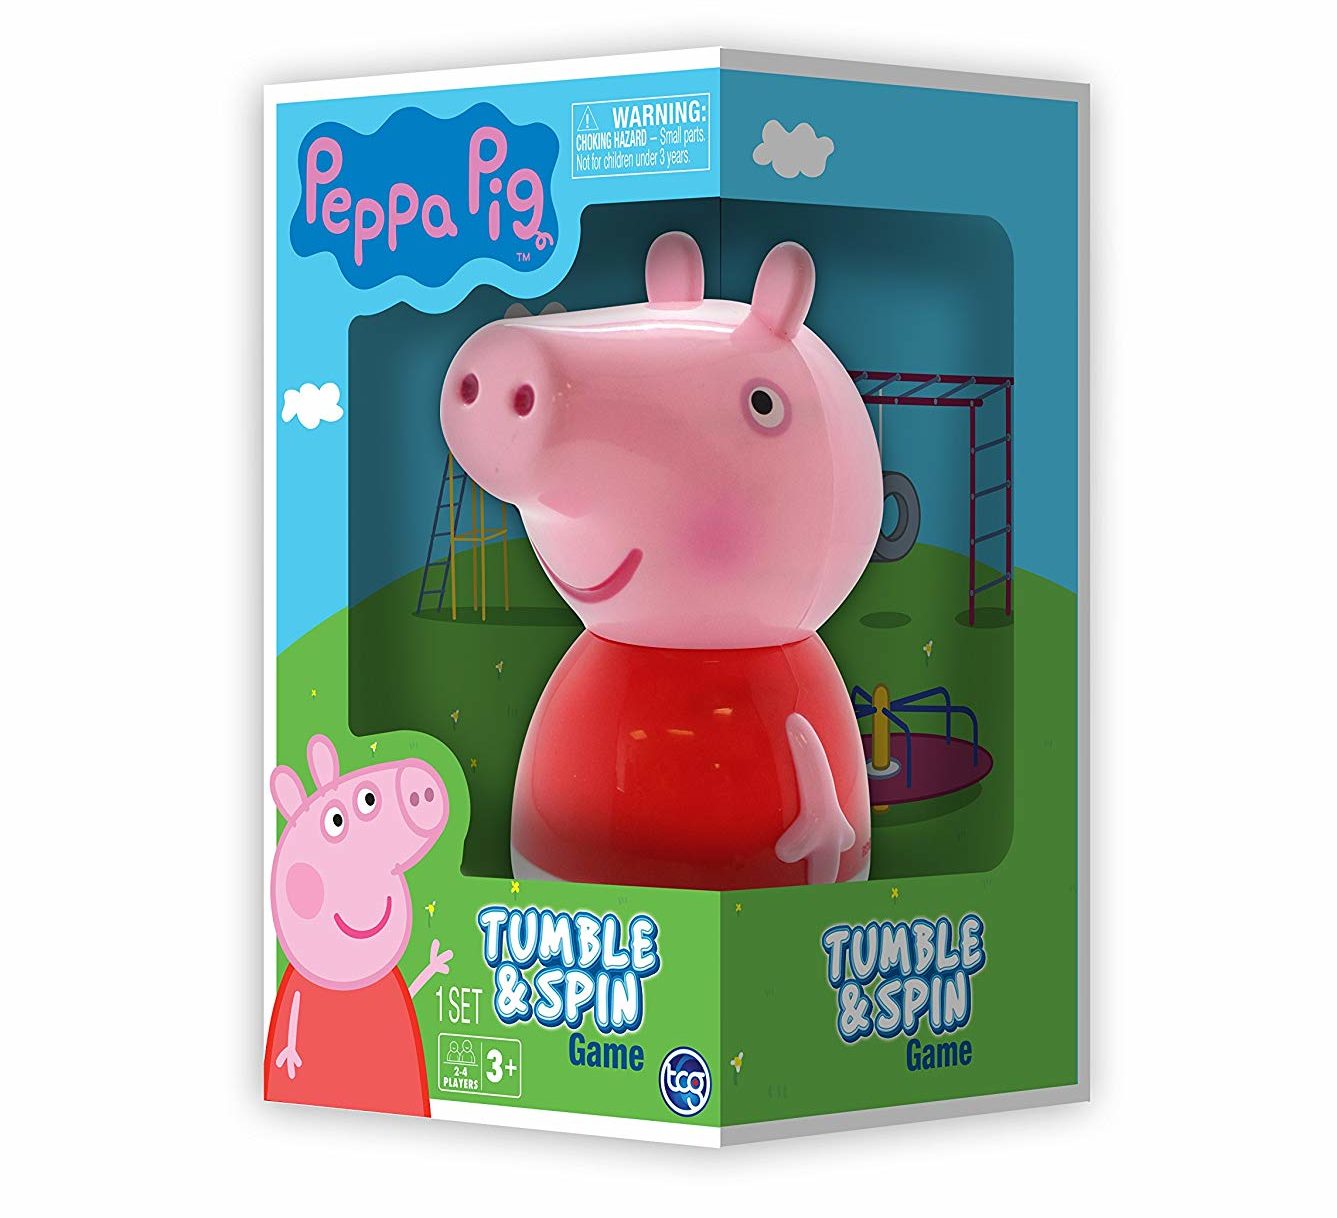 Best Peppa Pig Toys 2022: Tumble & Spin Game 2022